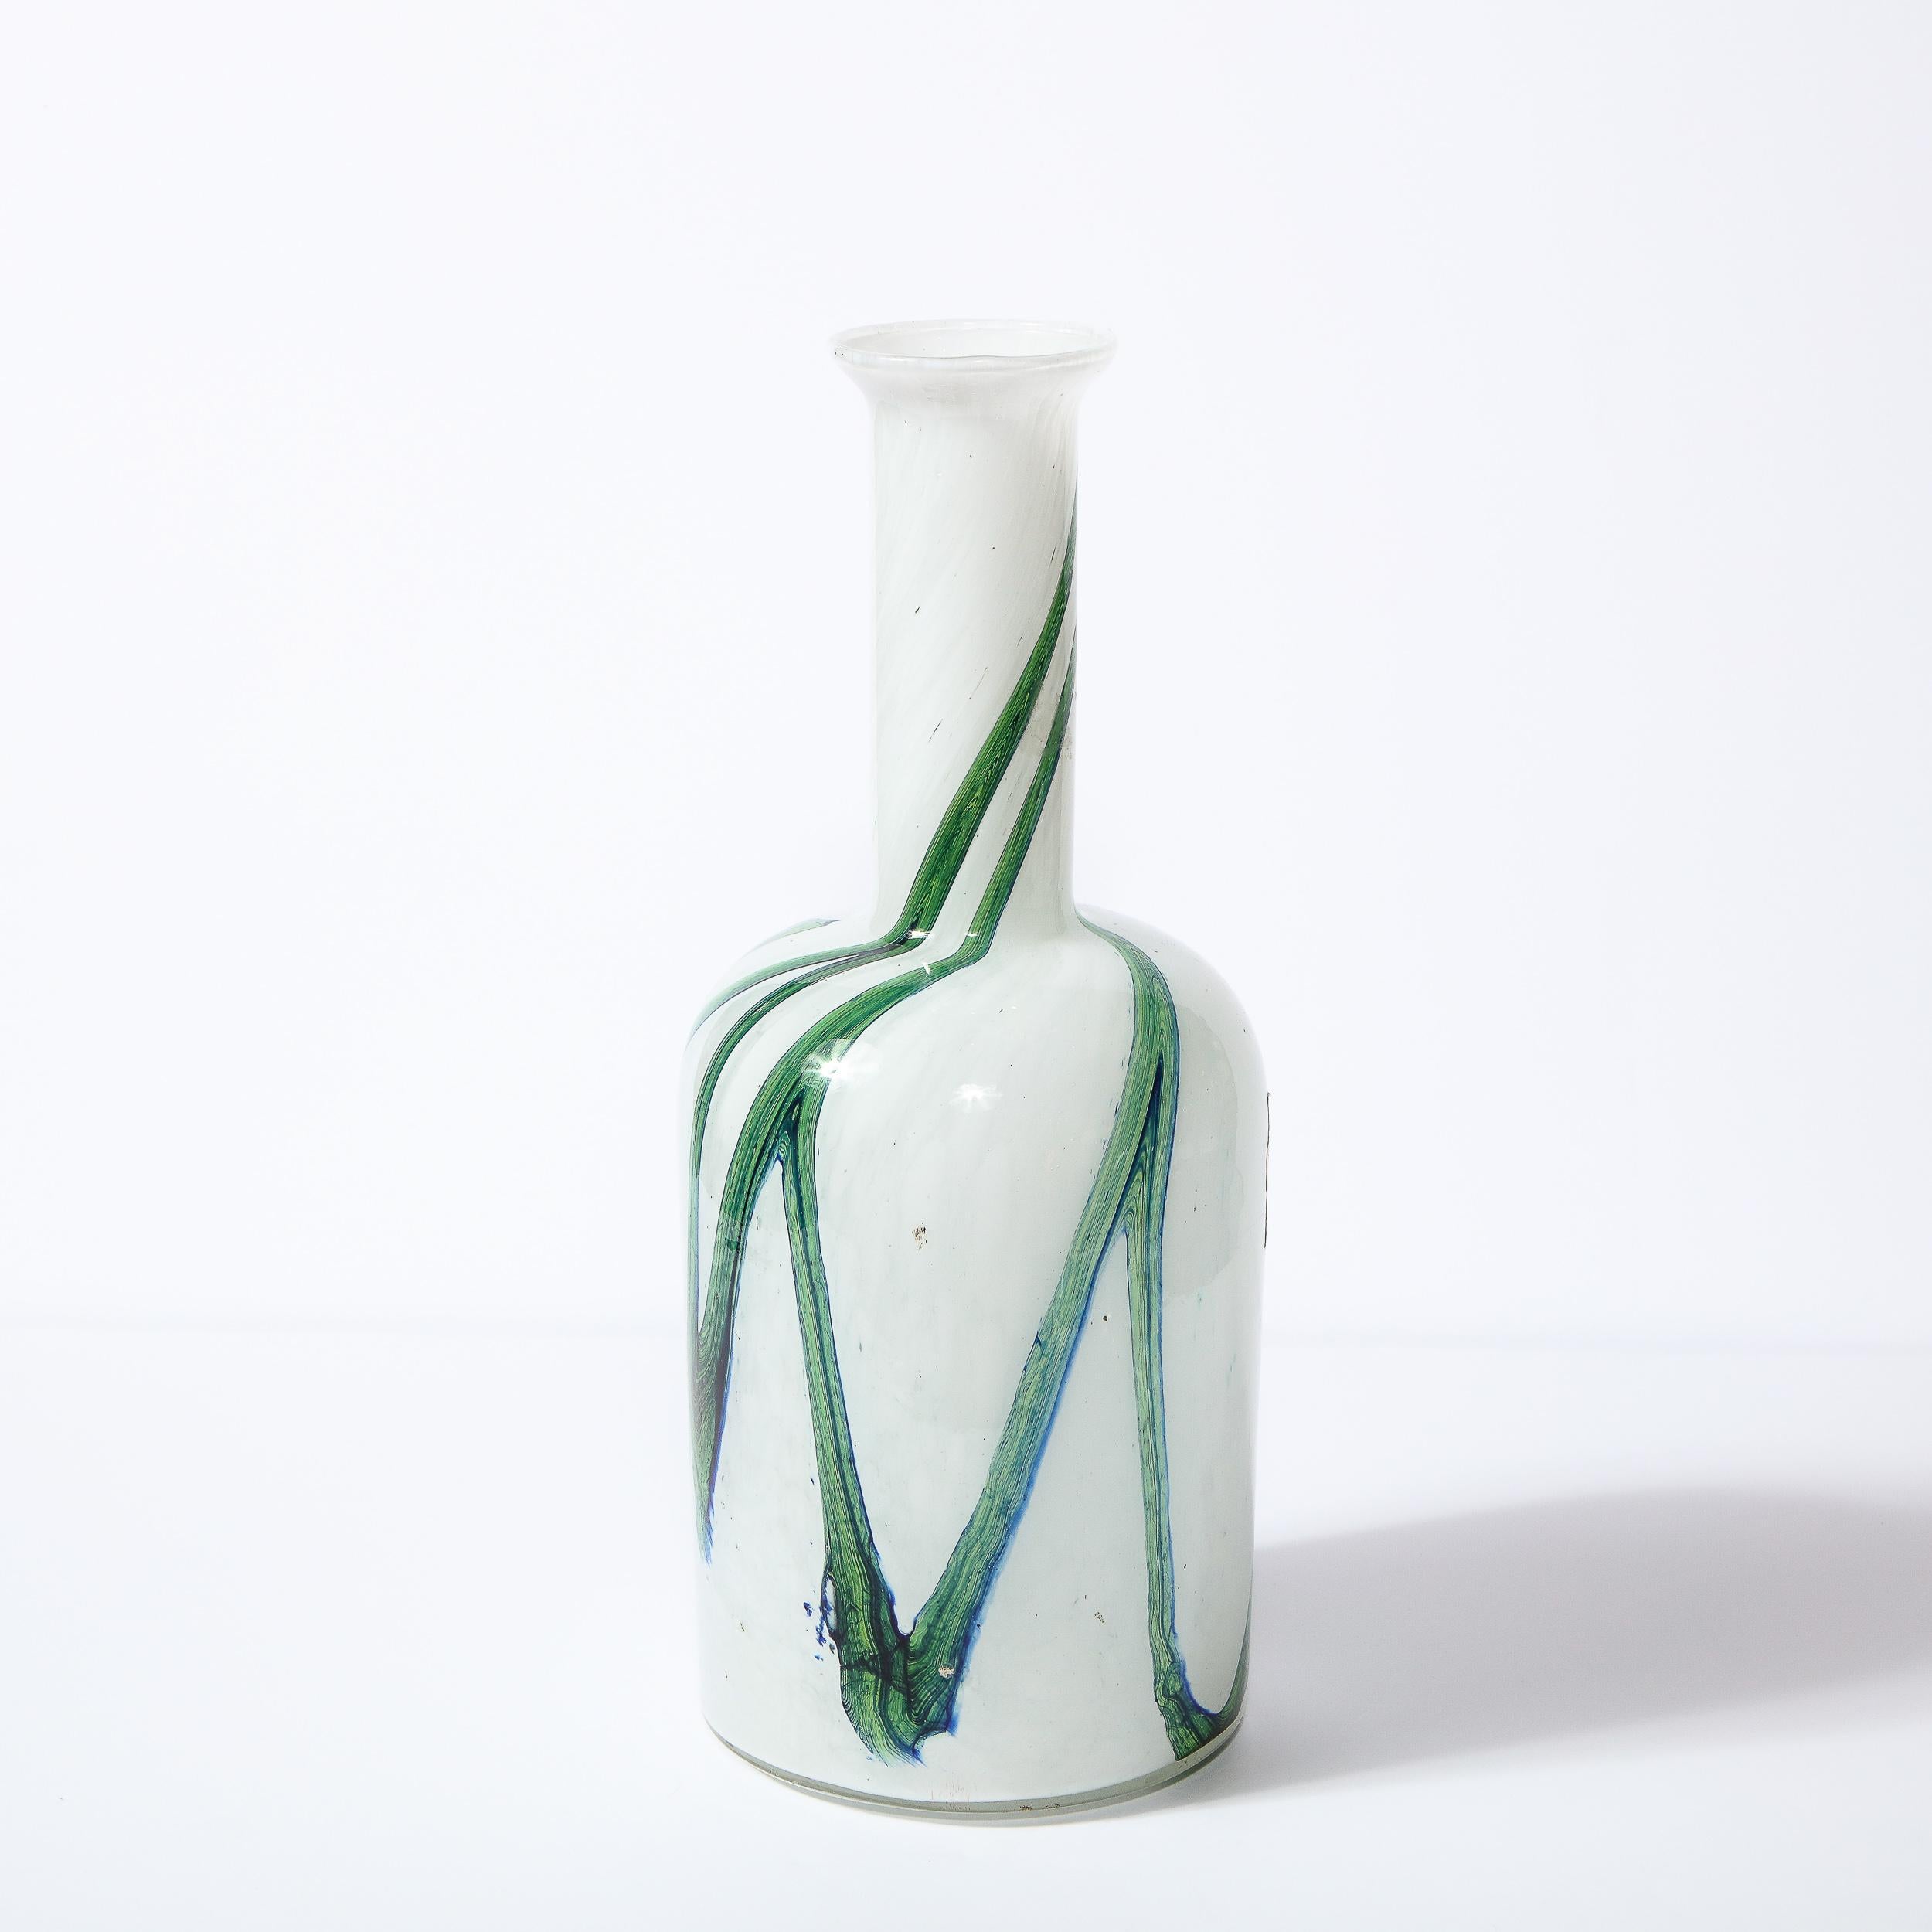 This stunning Scandinavian Mid-Century Modern vase was designed by the esteemed Otto Brauer and for Holmegaard, and handblown in Murano, Italy, circa 1960. The piece features a cylindrical body with curved shoulders that ascends into a slender